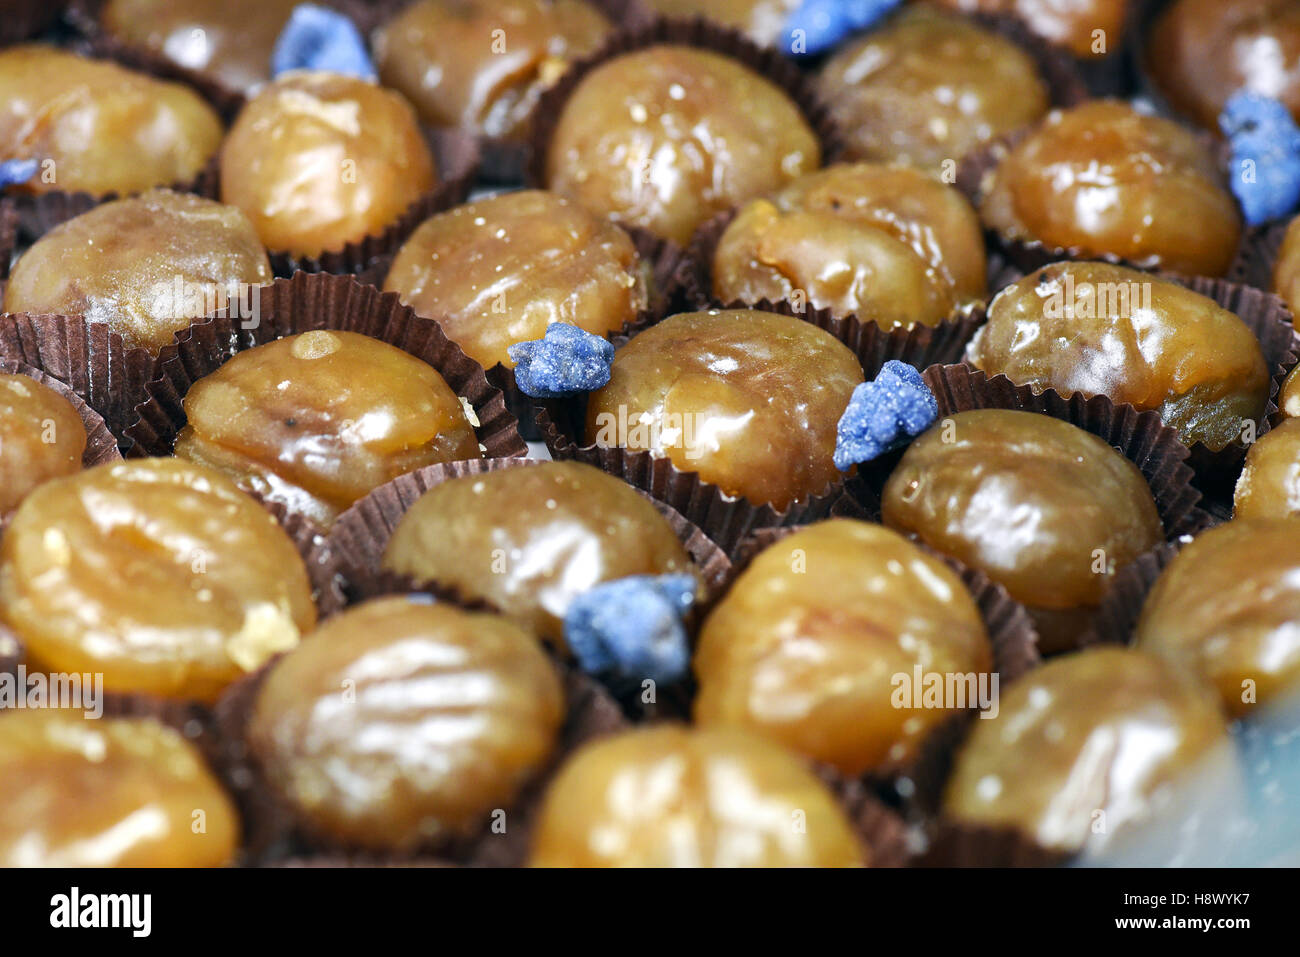 Marrons glaces stock photo. Image of marrons, chestnut - 46026158